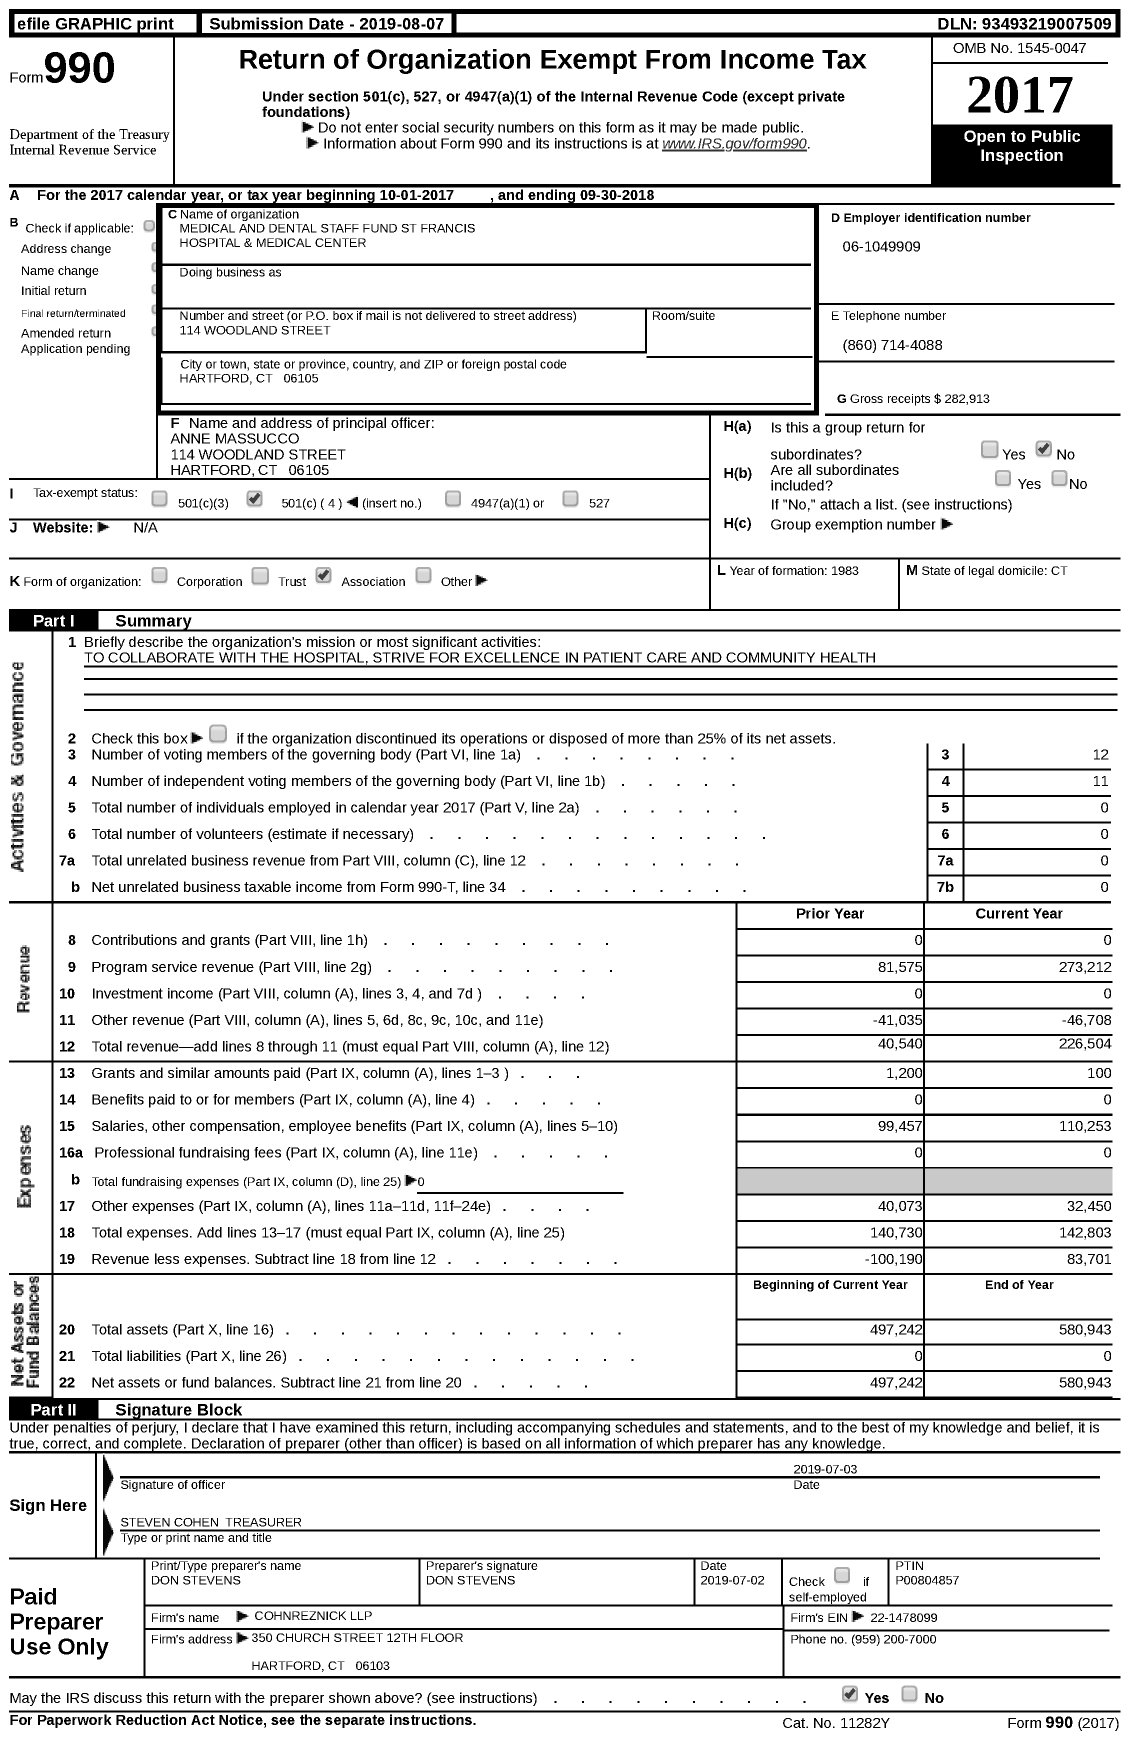 Image of first page of 2017 Form 990 for Medical and Dental Staff Fund St Francis Hospital and Medical Center